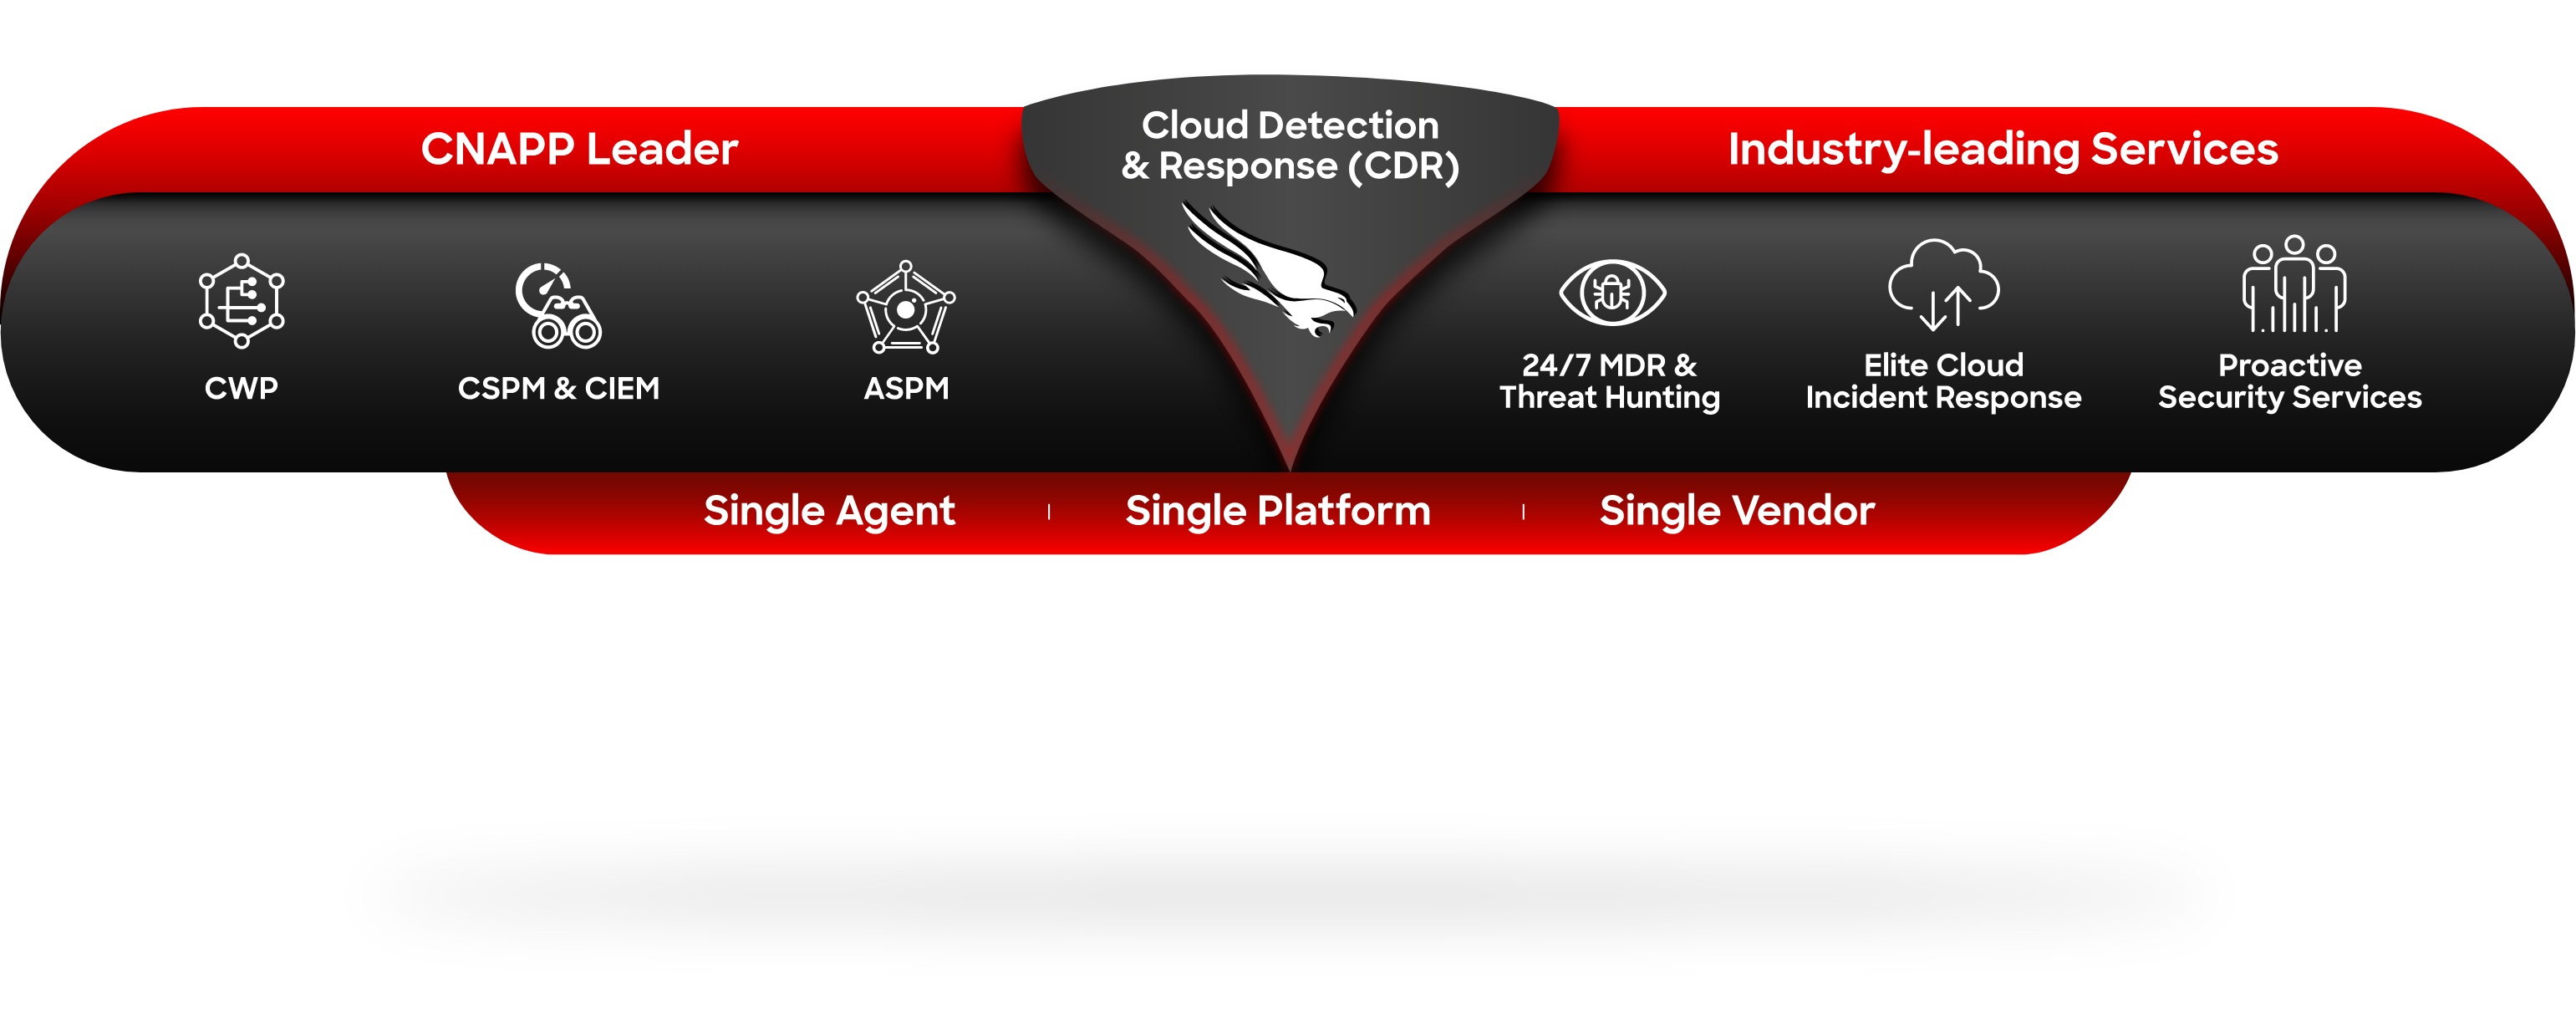 This graph depicts all capabilities pertaining to Cloud Detection and Response (CDR)